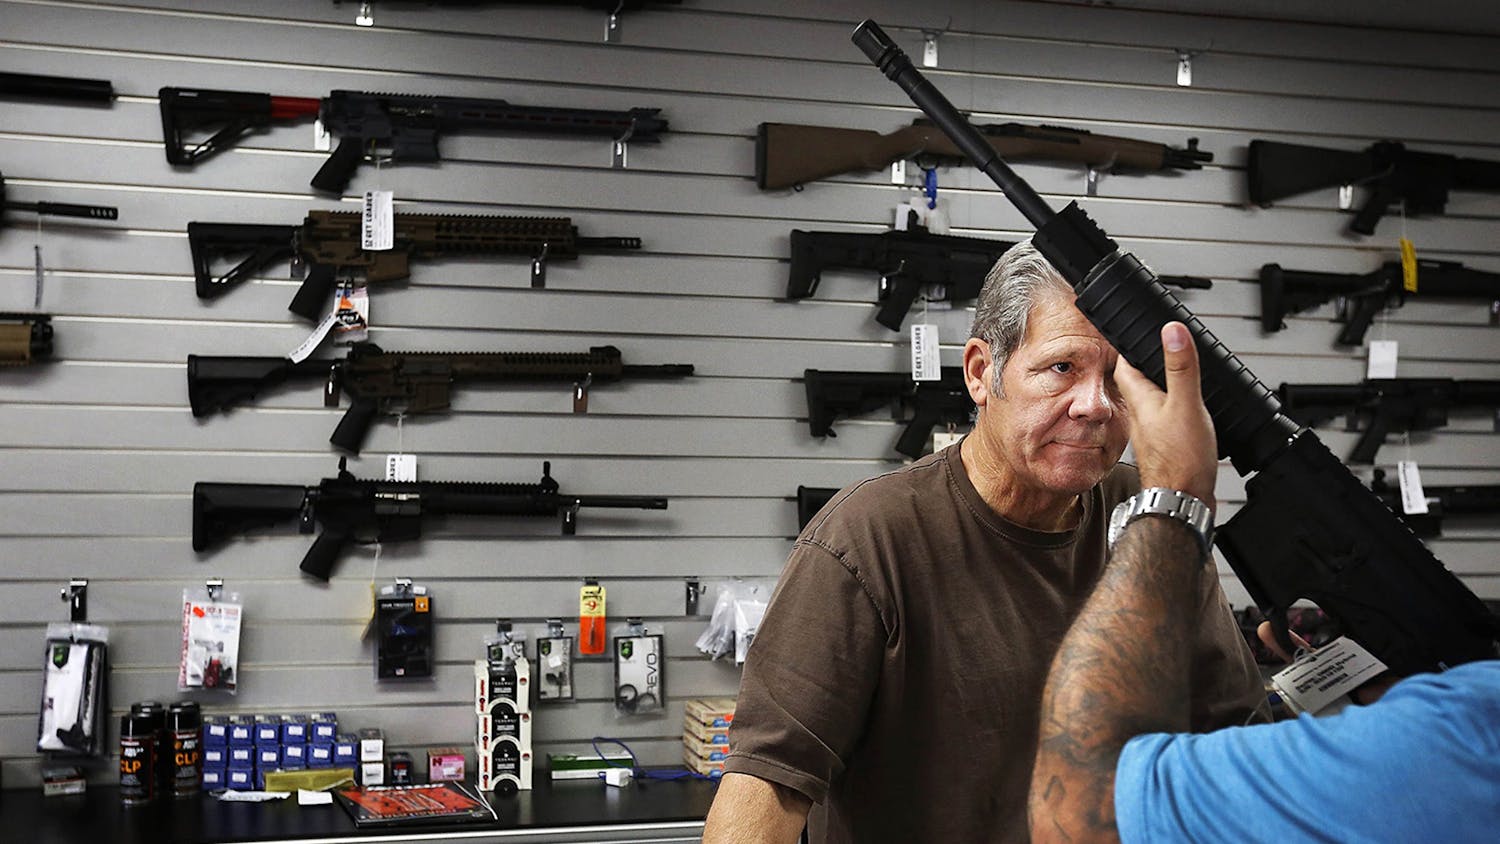 Frank Cobet, gunsmith of the Get Loaded gun store, shows a customer an AR-15 rifle Dec. 8, 2015, in Chino, California. The FBI struggles to complete hundreds of gun background checks each year because of a deadline that requires it to purge them from its computers.